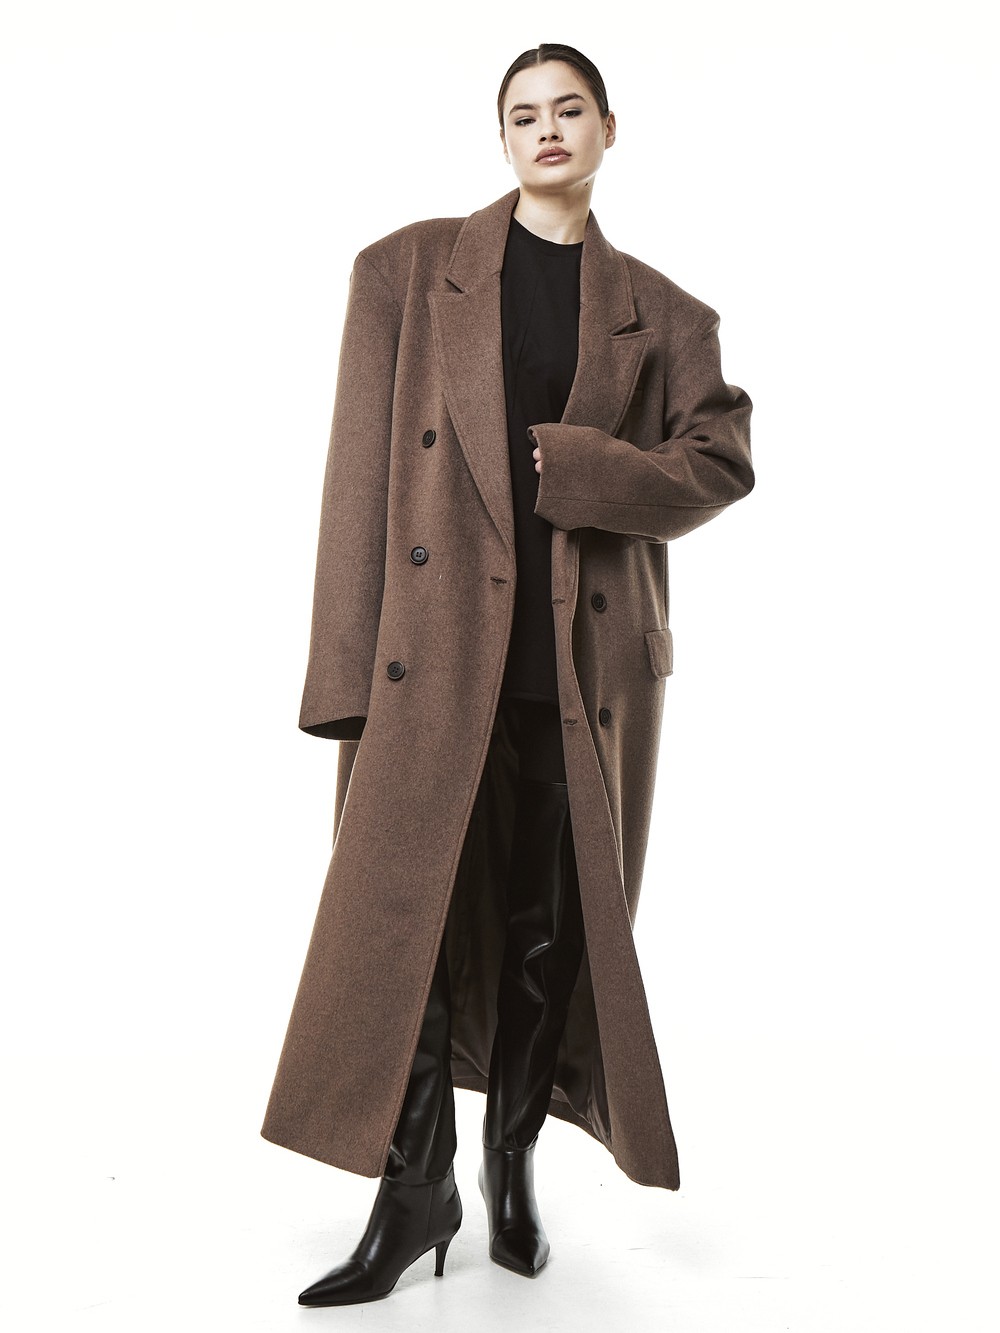 Insulated grandfather's coat in tobacco color